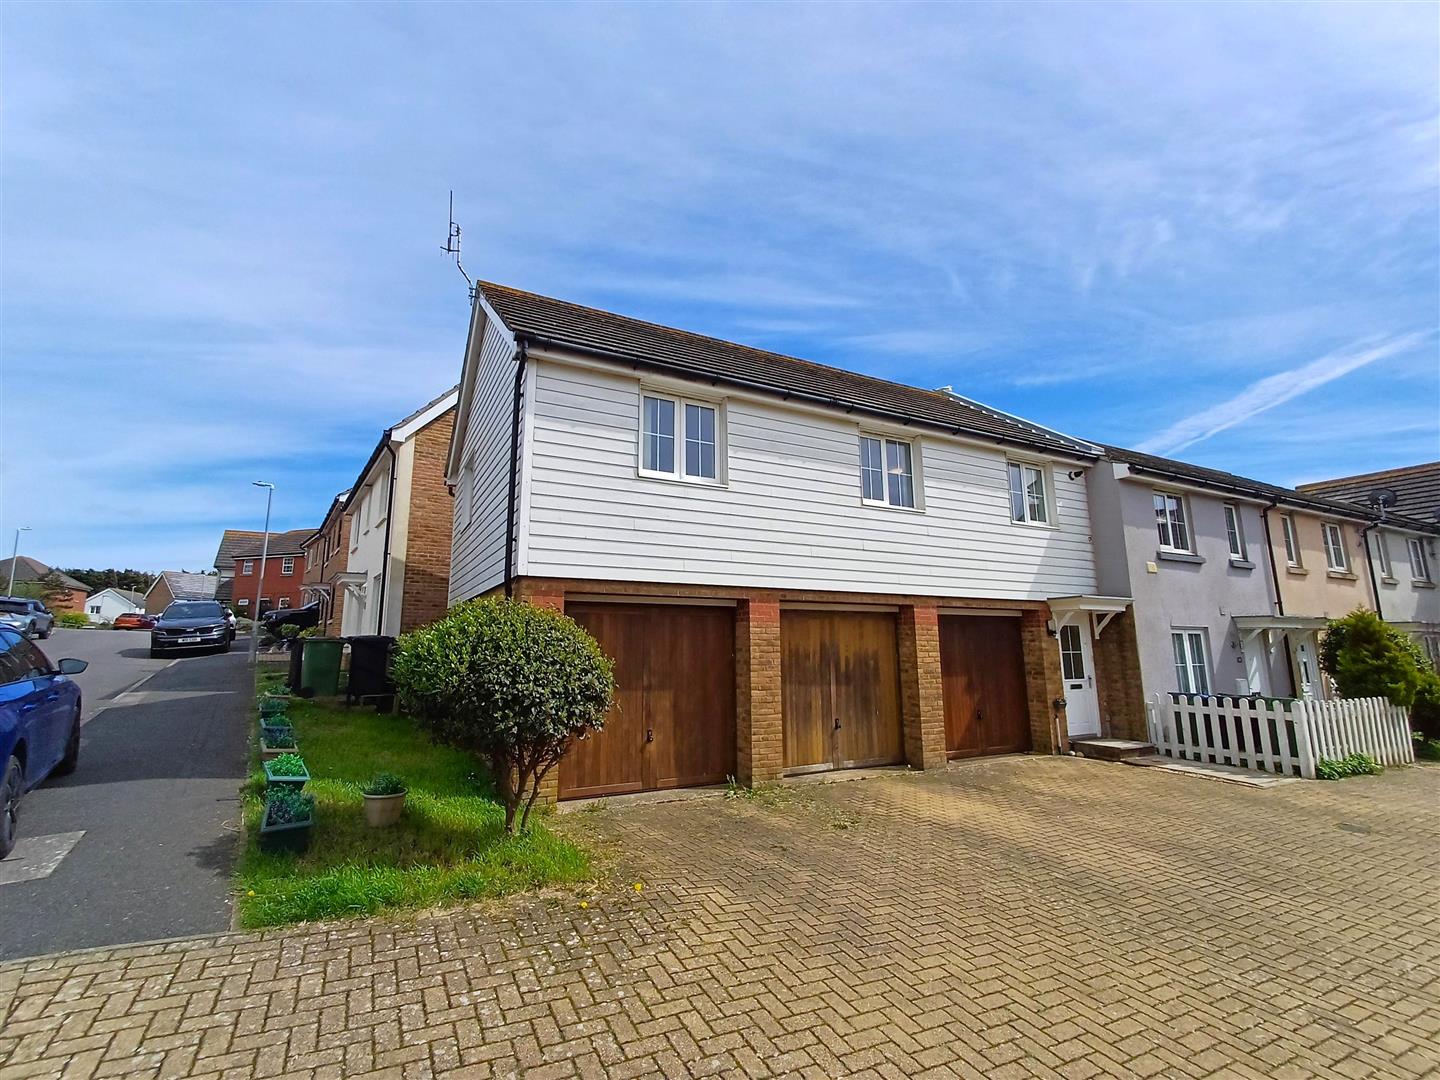 Roundhouse Crescent, Peacehaven